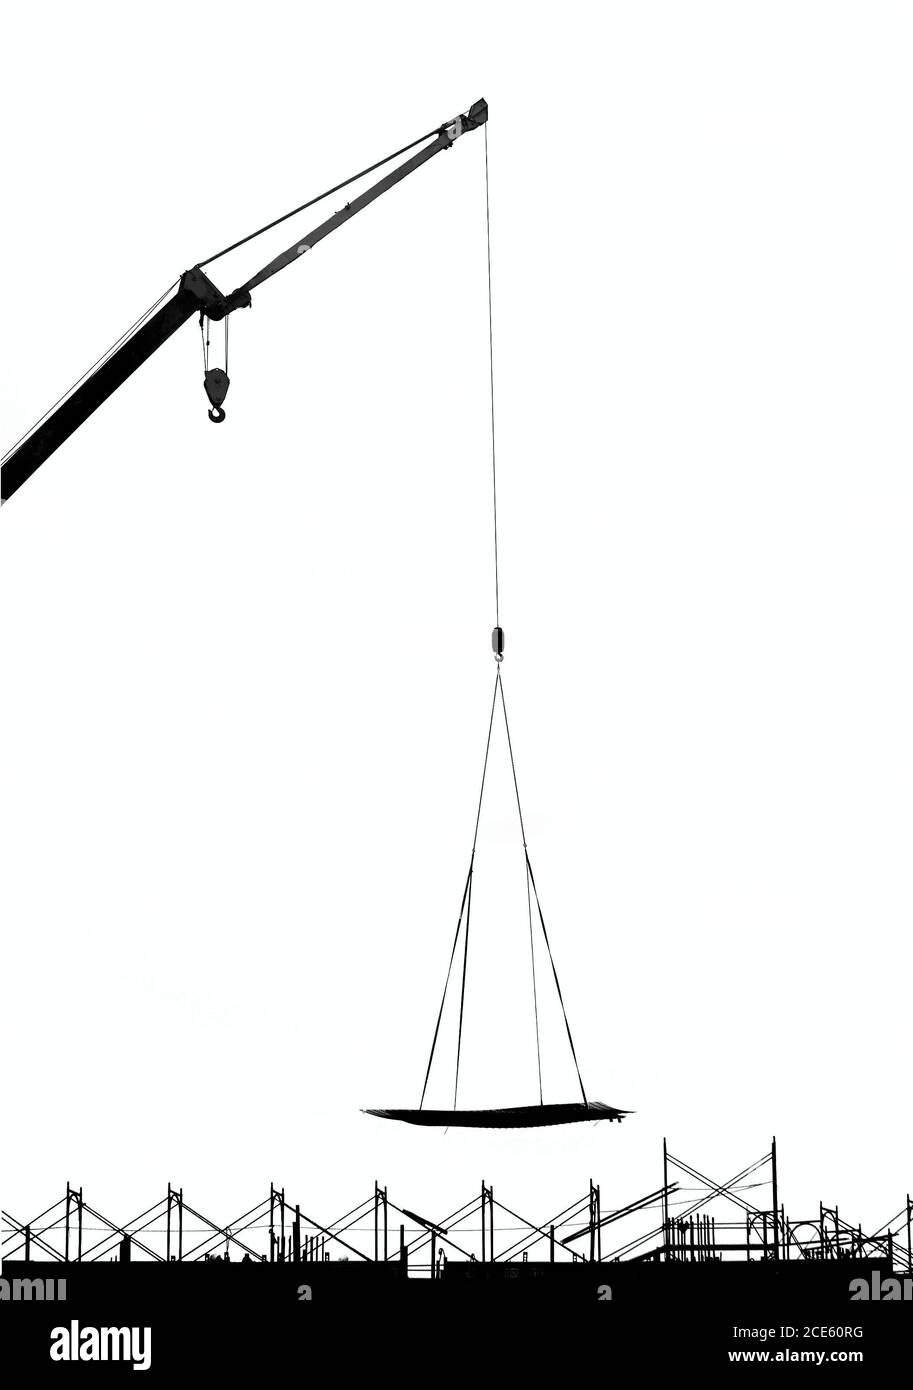 Outline image of a crane lowering a metal plate onto a construction site Stock Photo